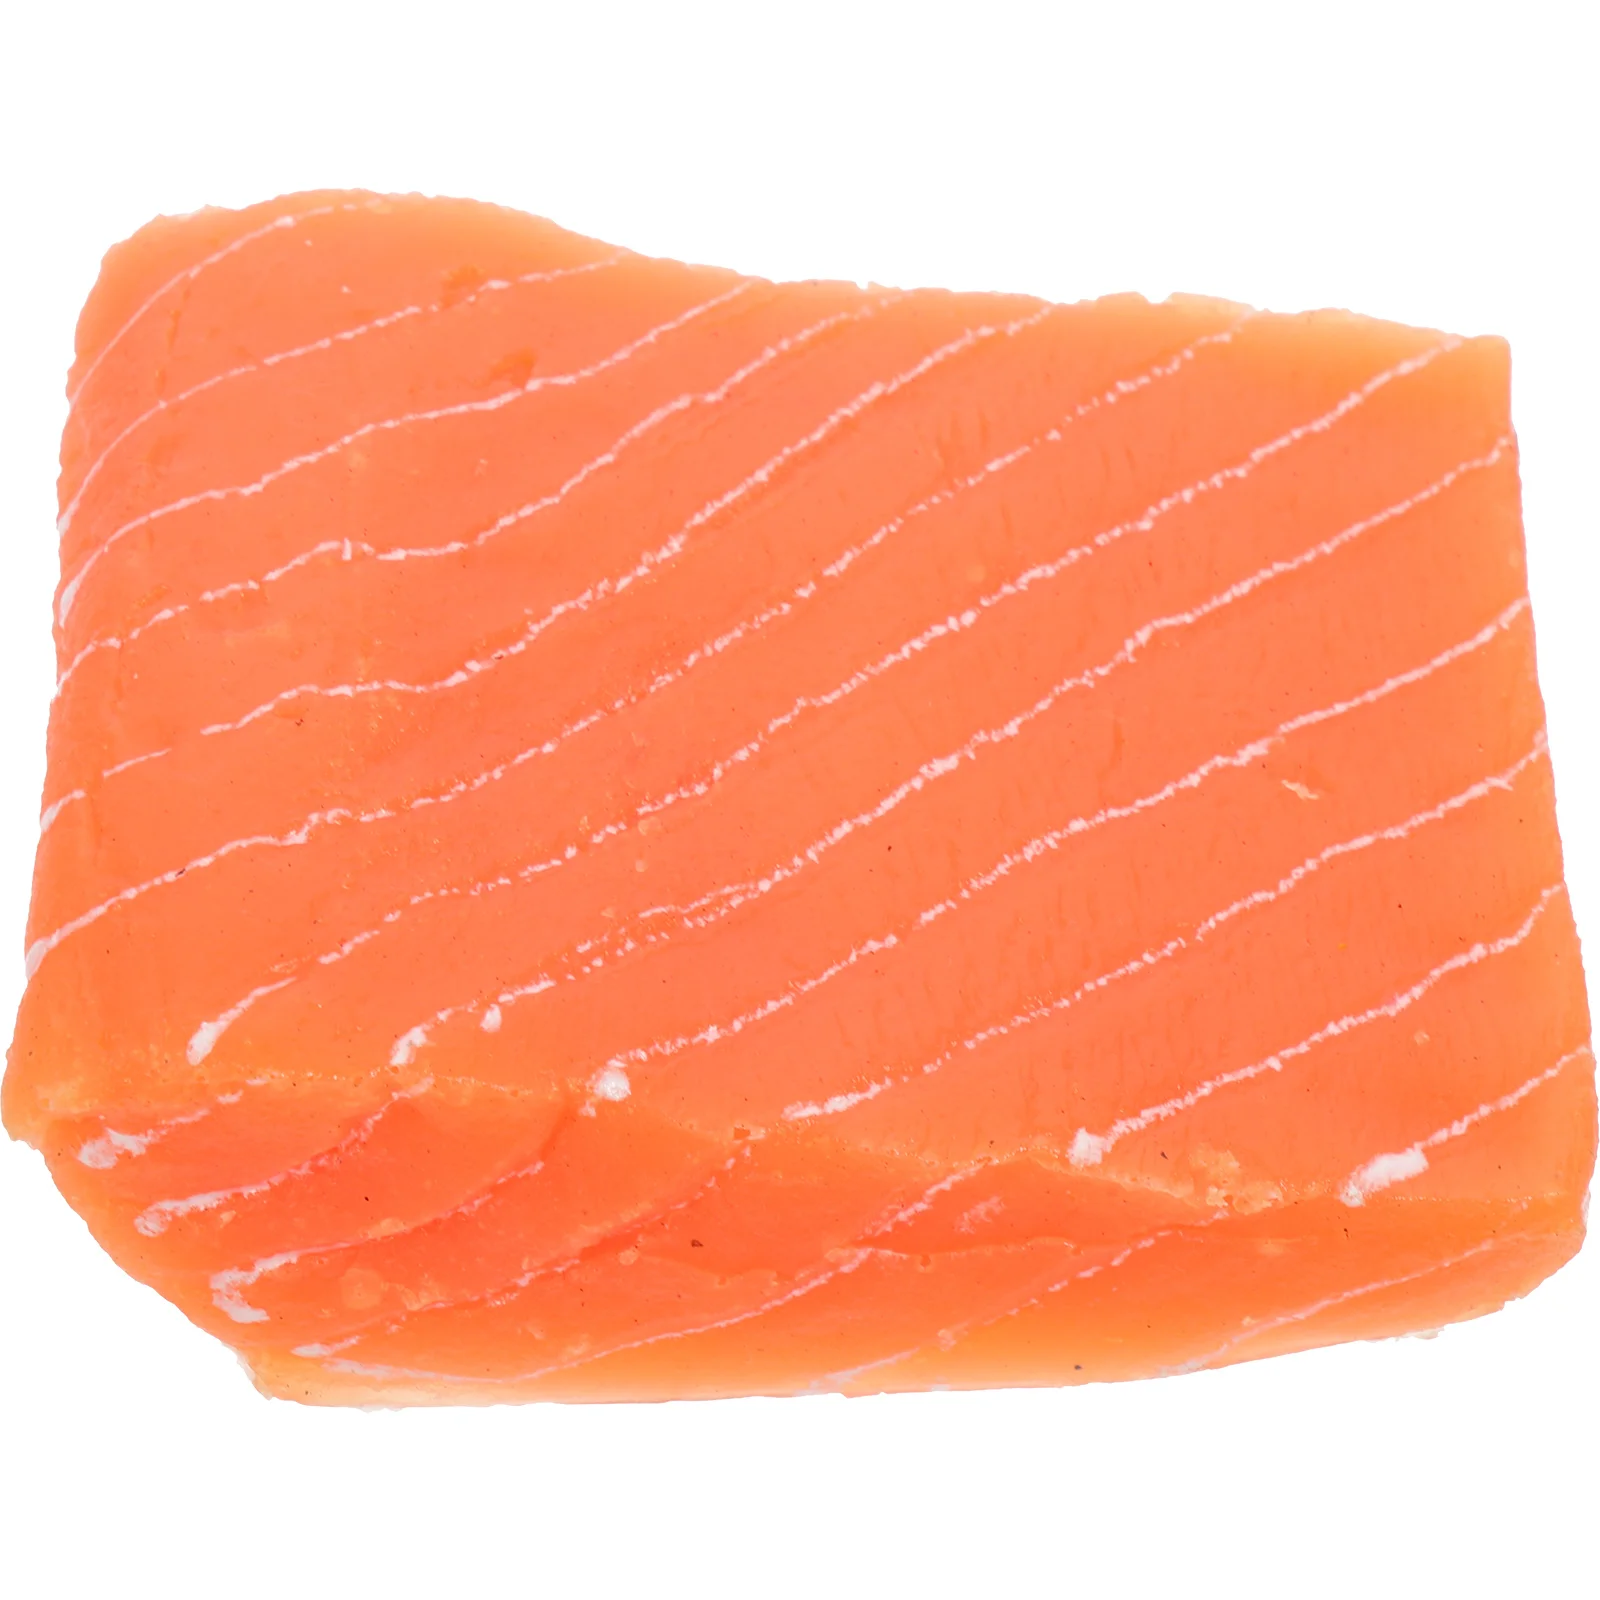 

Meat Artificial Salmon Fake Toy Model Props Play Slices Sushi Lifelike Simulation Kitchen Pretend Models Decor Cooked Faux